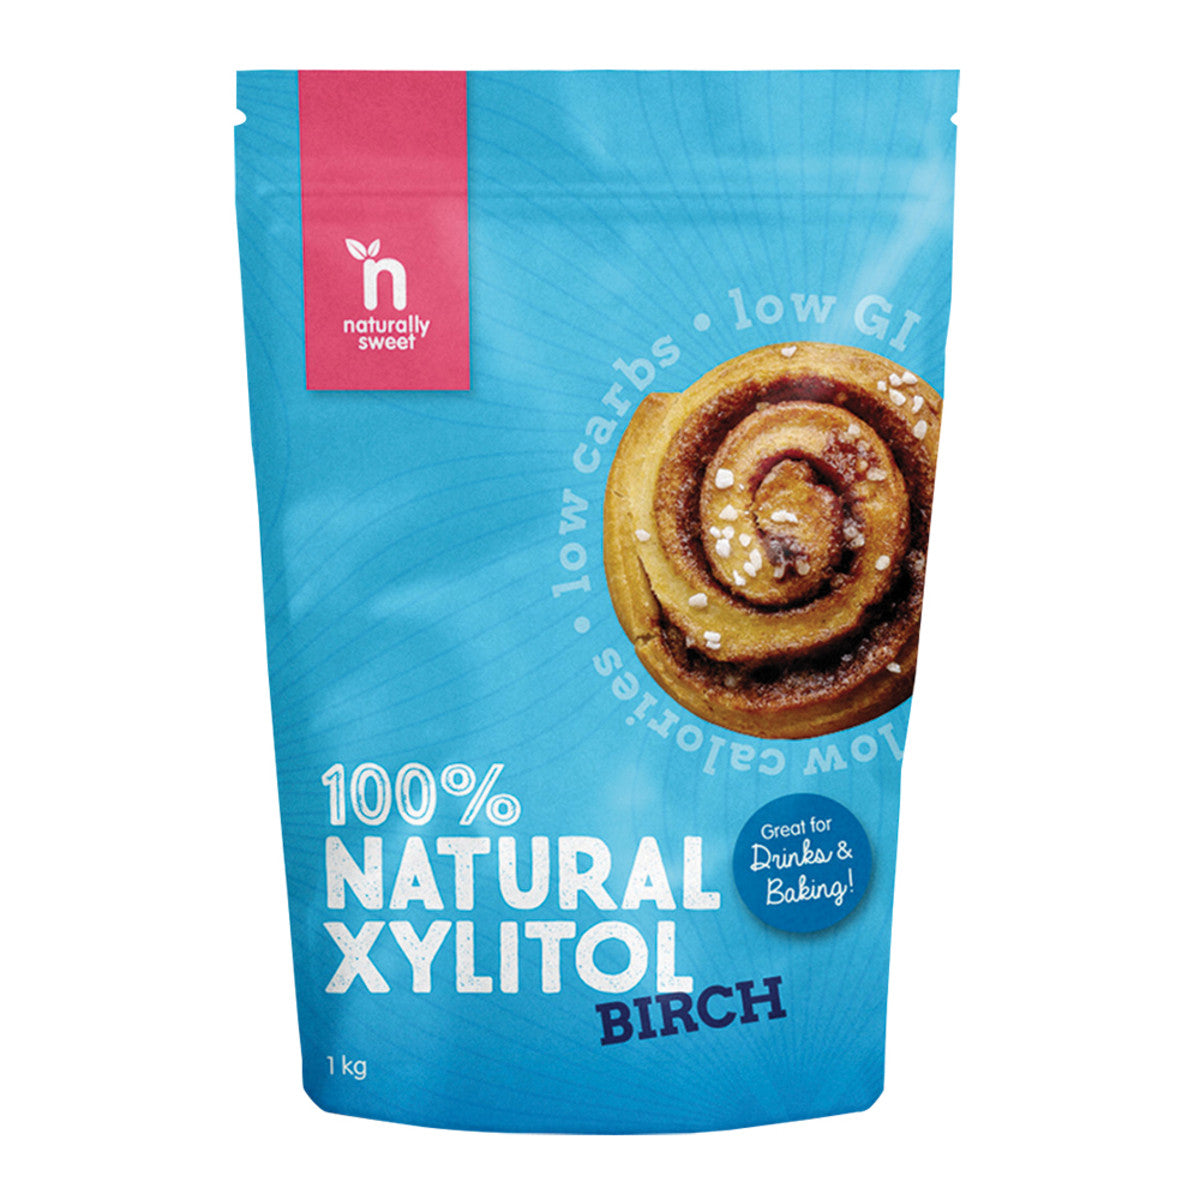 Naturally Sweet - 100% Natural Xylitol Birch